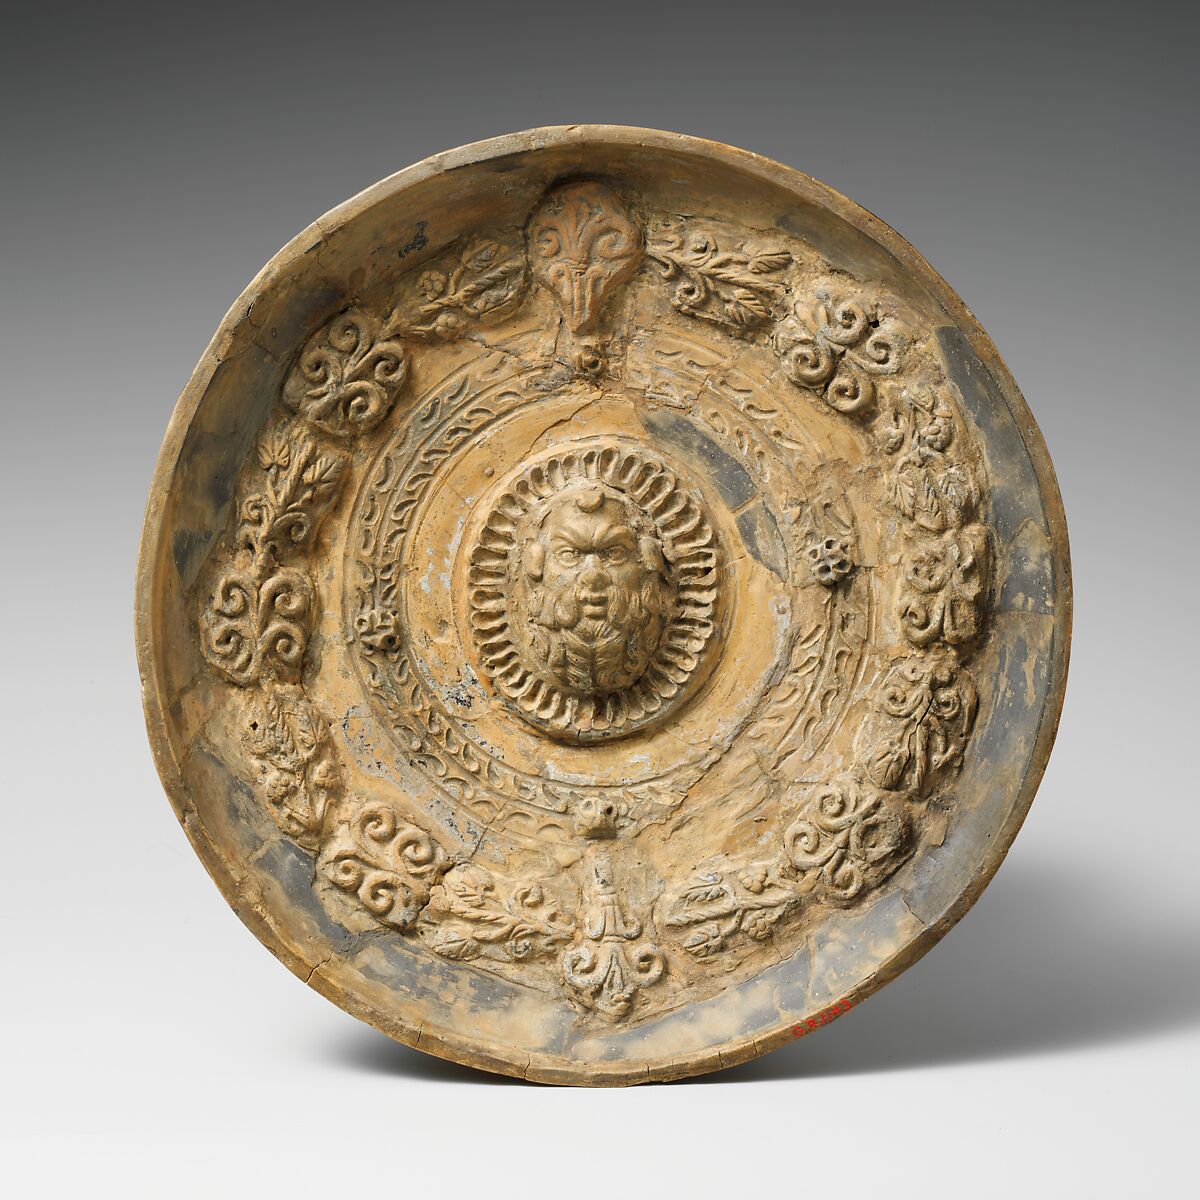 Terracotta phiale (libation bowl), Attributed to the Bolsena Group, Terracotta, Etruscan 